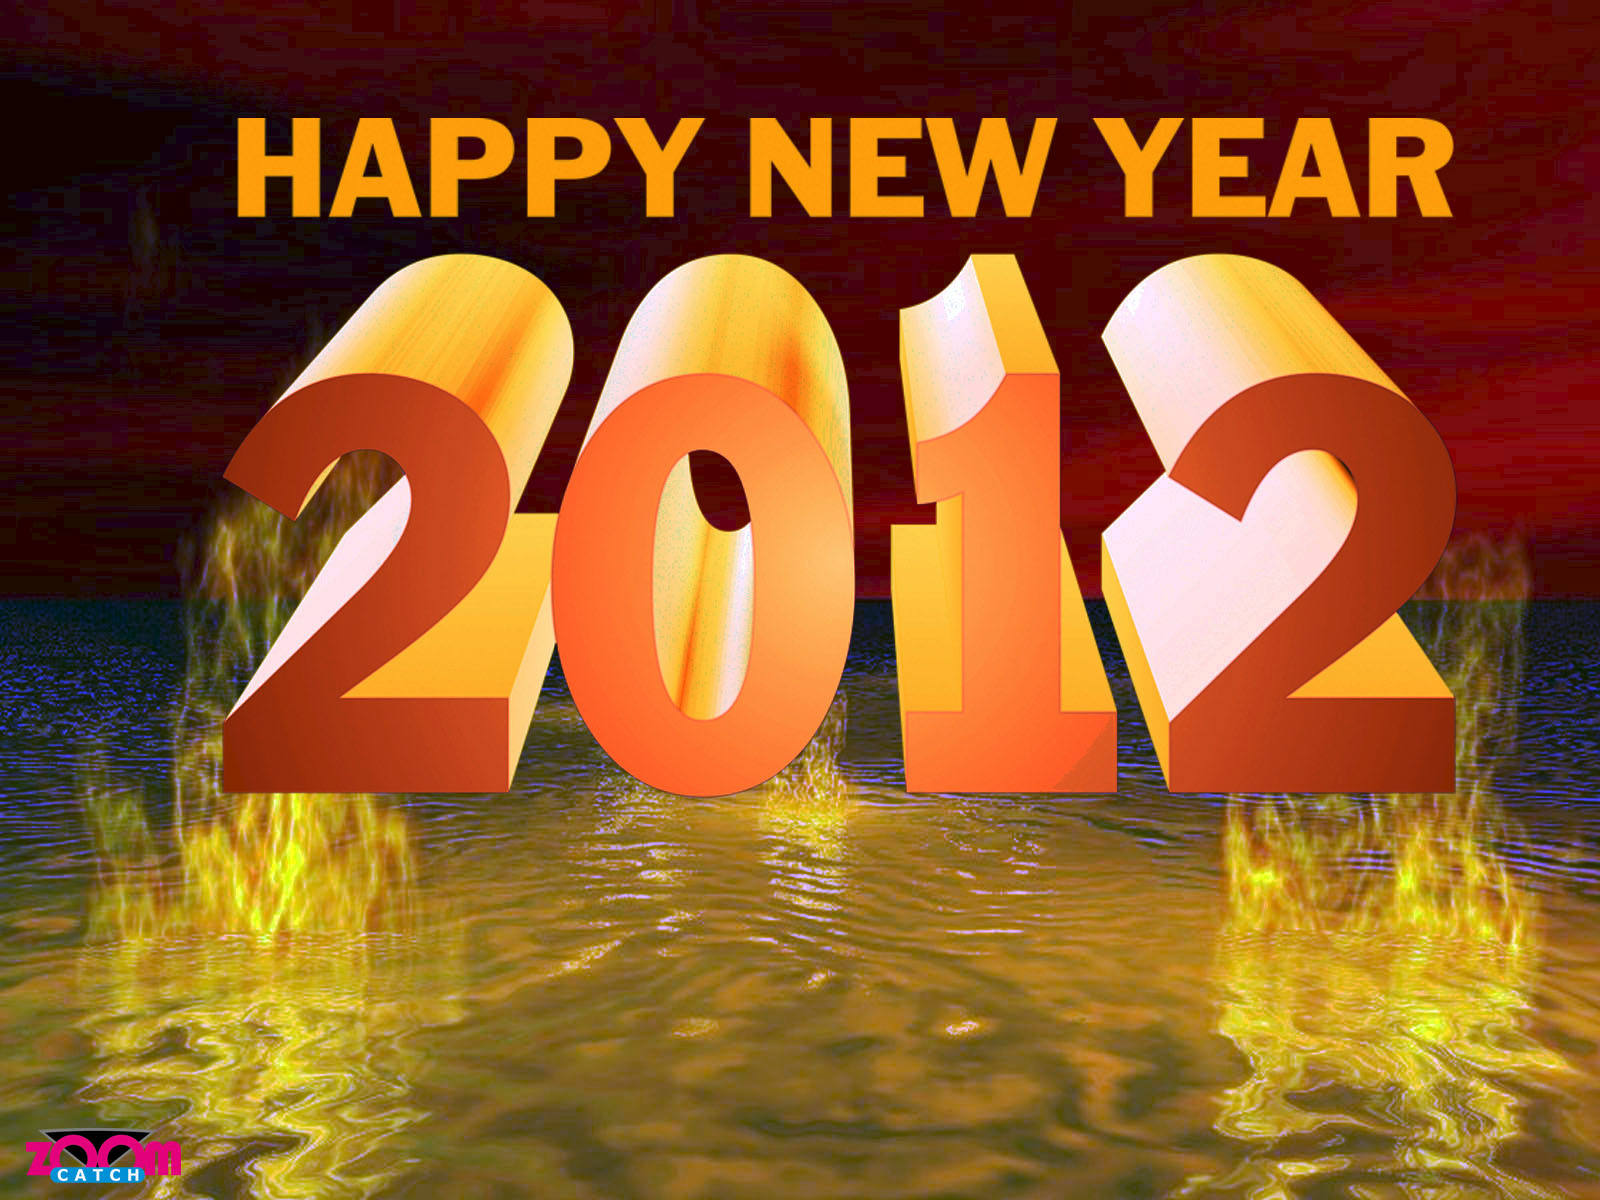 PicturesPool: Happy New Year 2012 Wallpapers